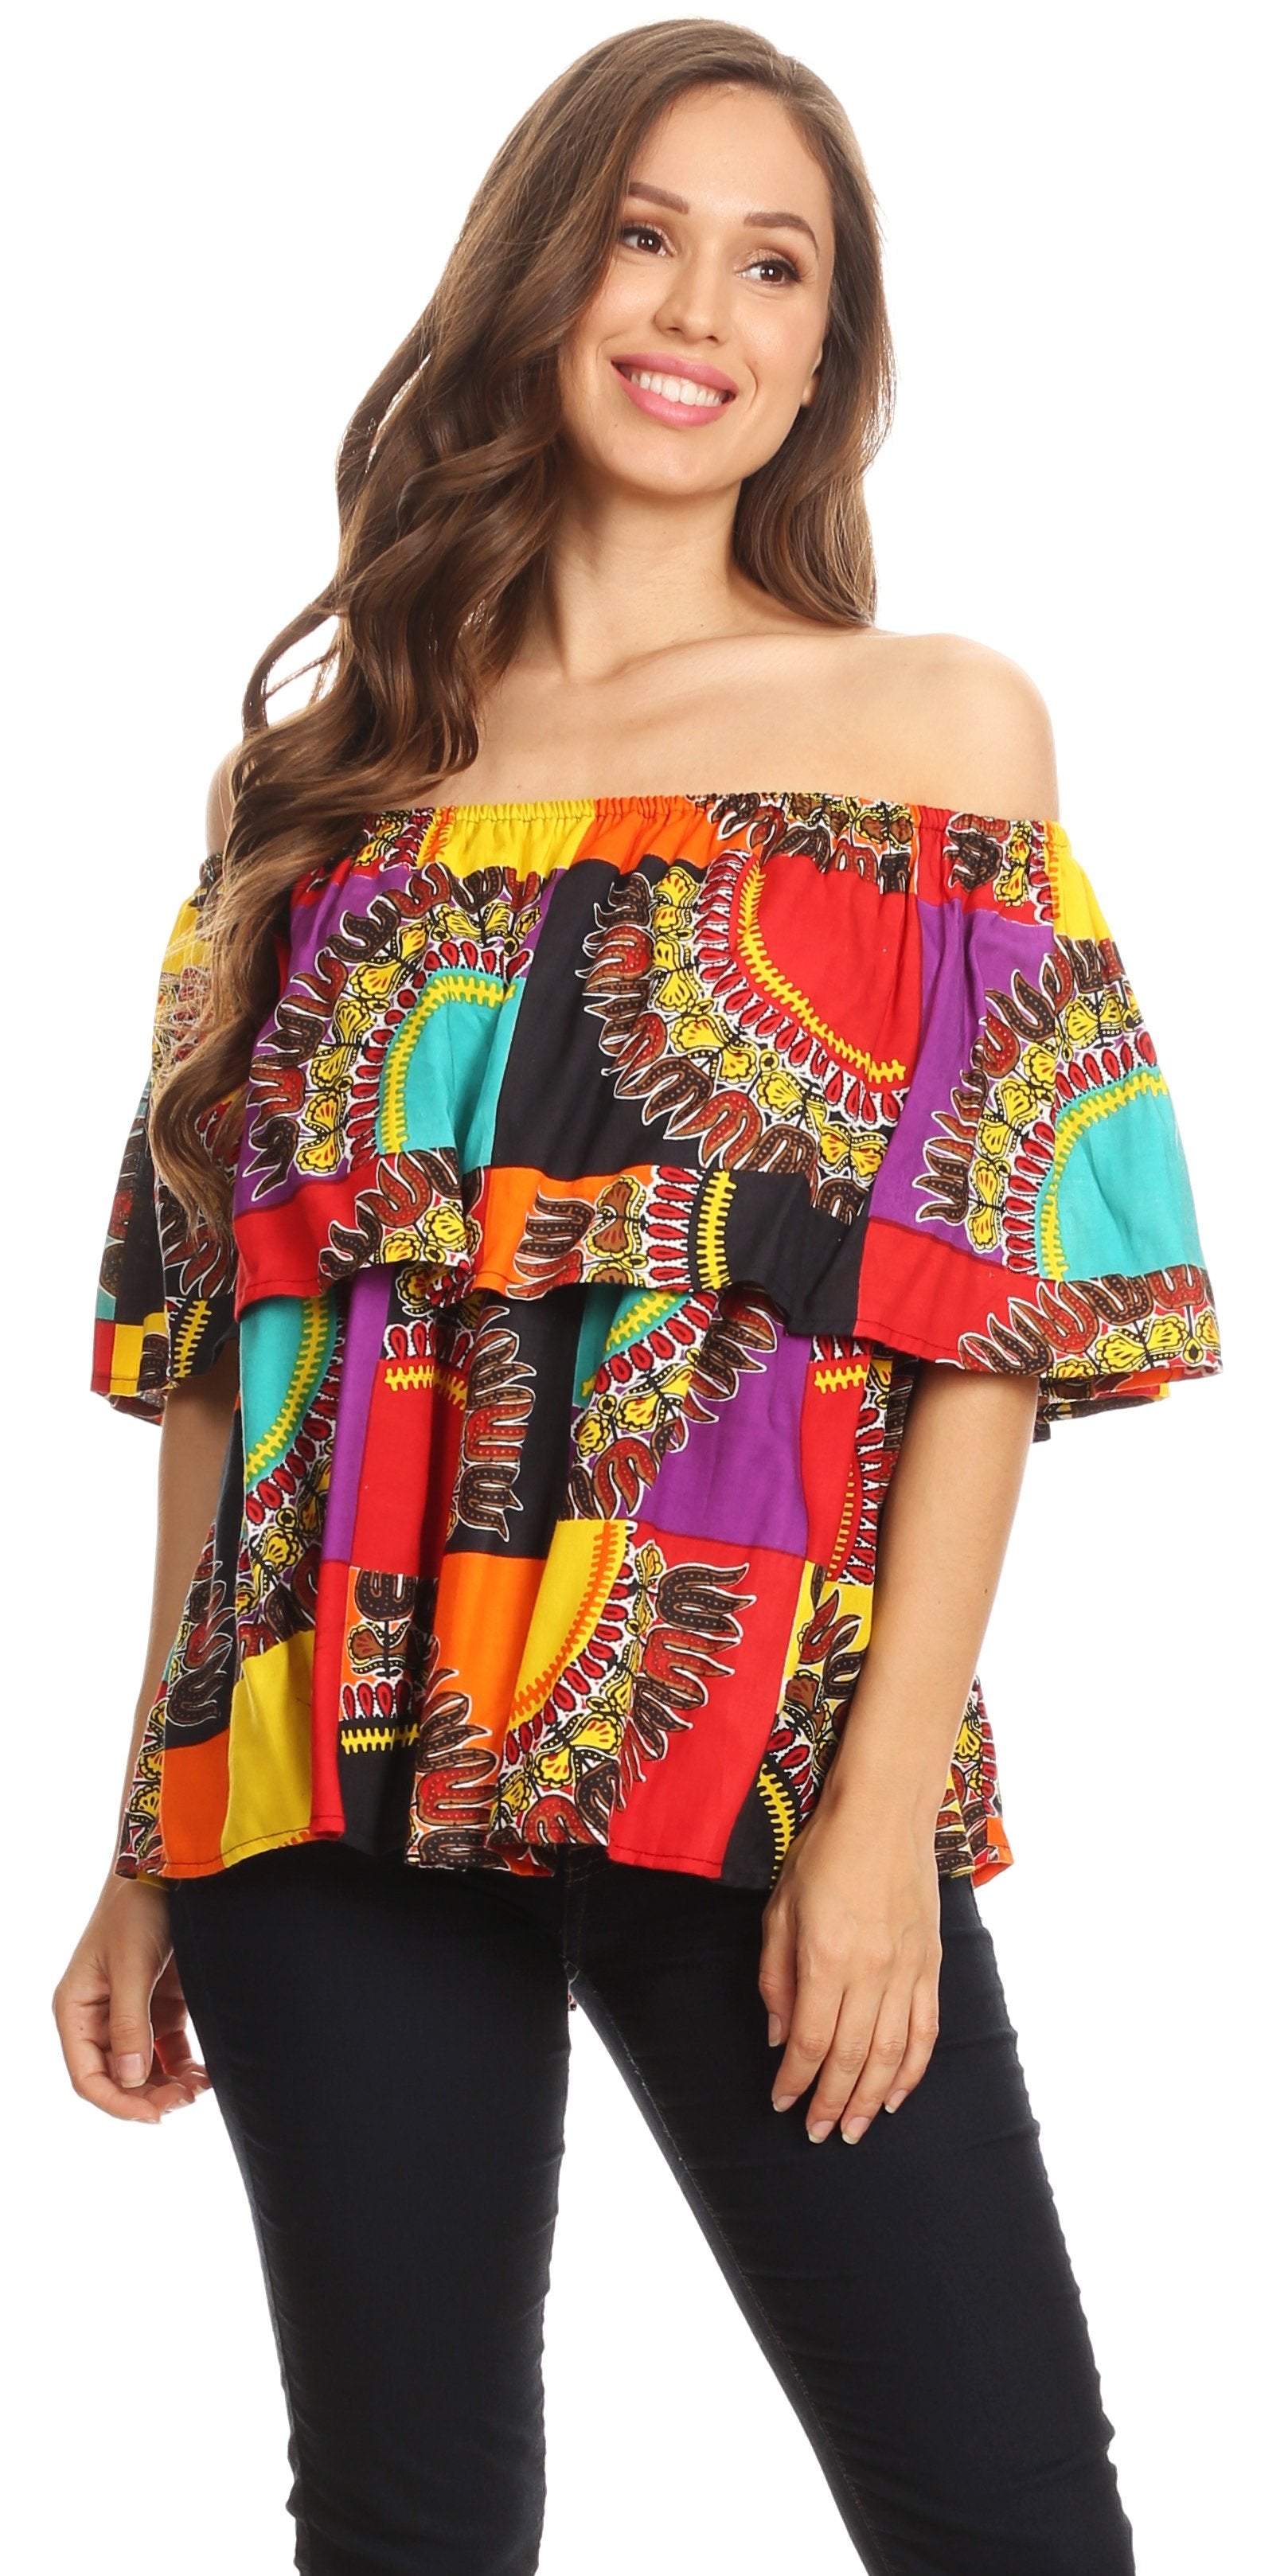 Azra Casual Colorful African Dashiki Off-Shoulder Blouse Top Flowy and Fun!